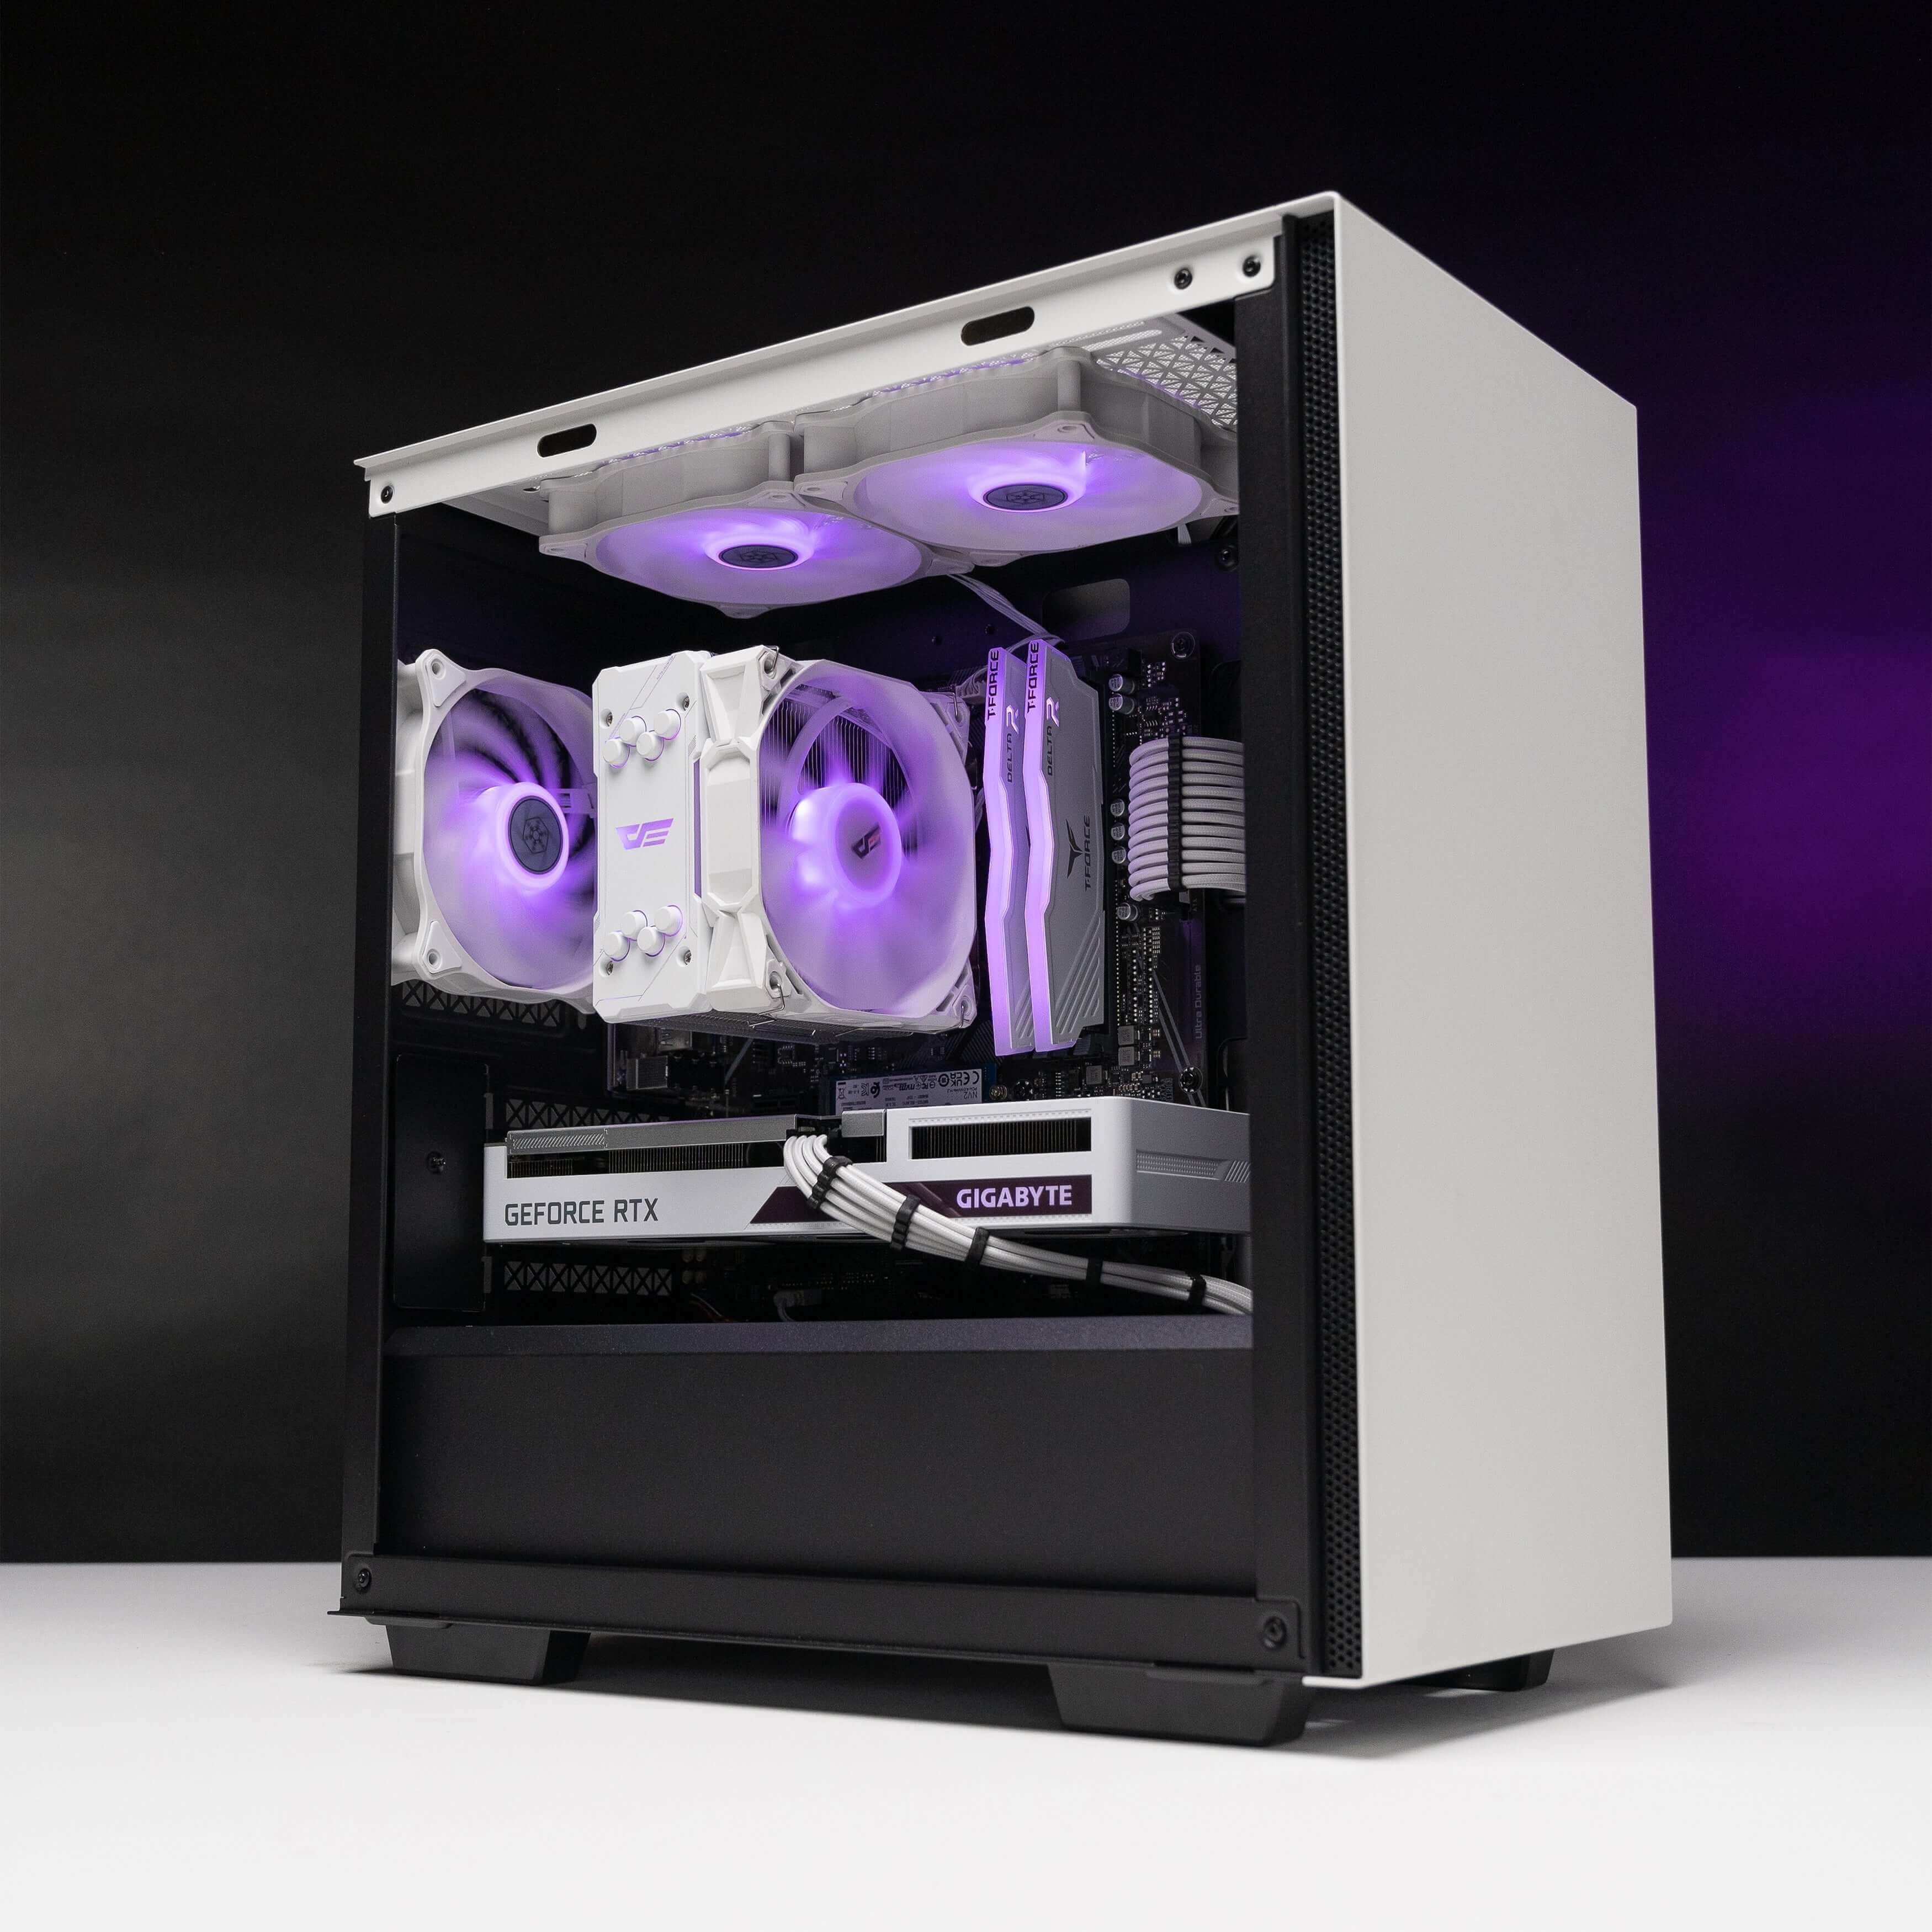 Side view of the sleek DEEP FREEZE: LVL 6 Gaming PC showcasing its Darkair Pro CPU Cooler A-RGB White and SilverStone Air Blazer 120R 120mm X3 fans